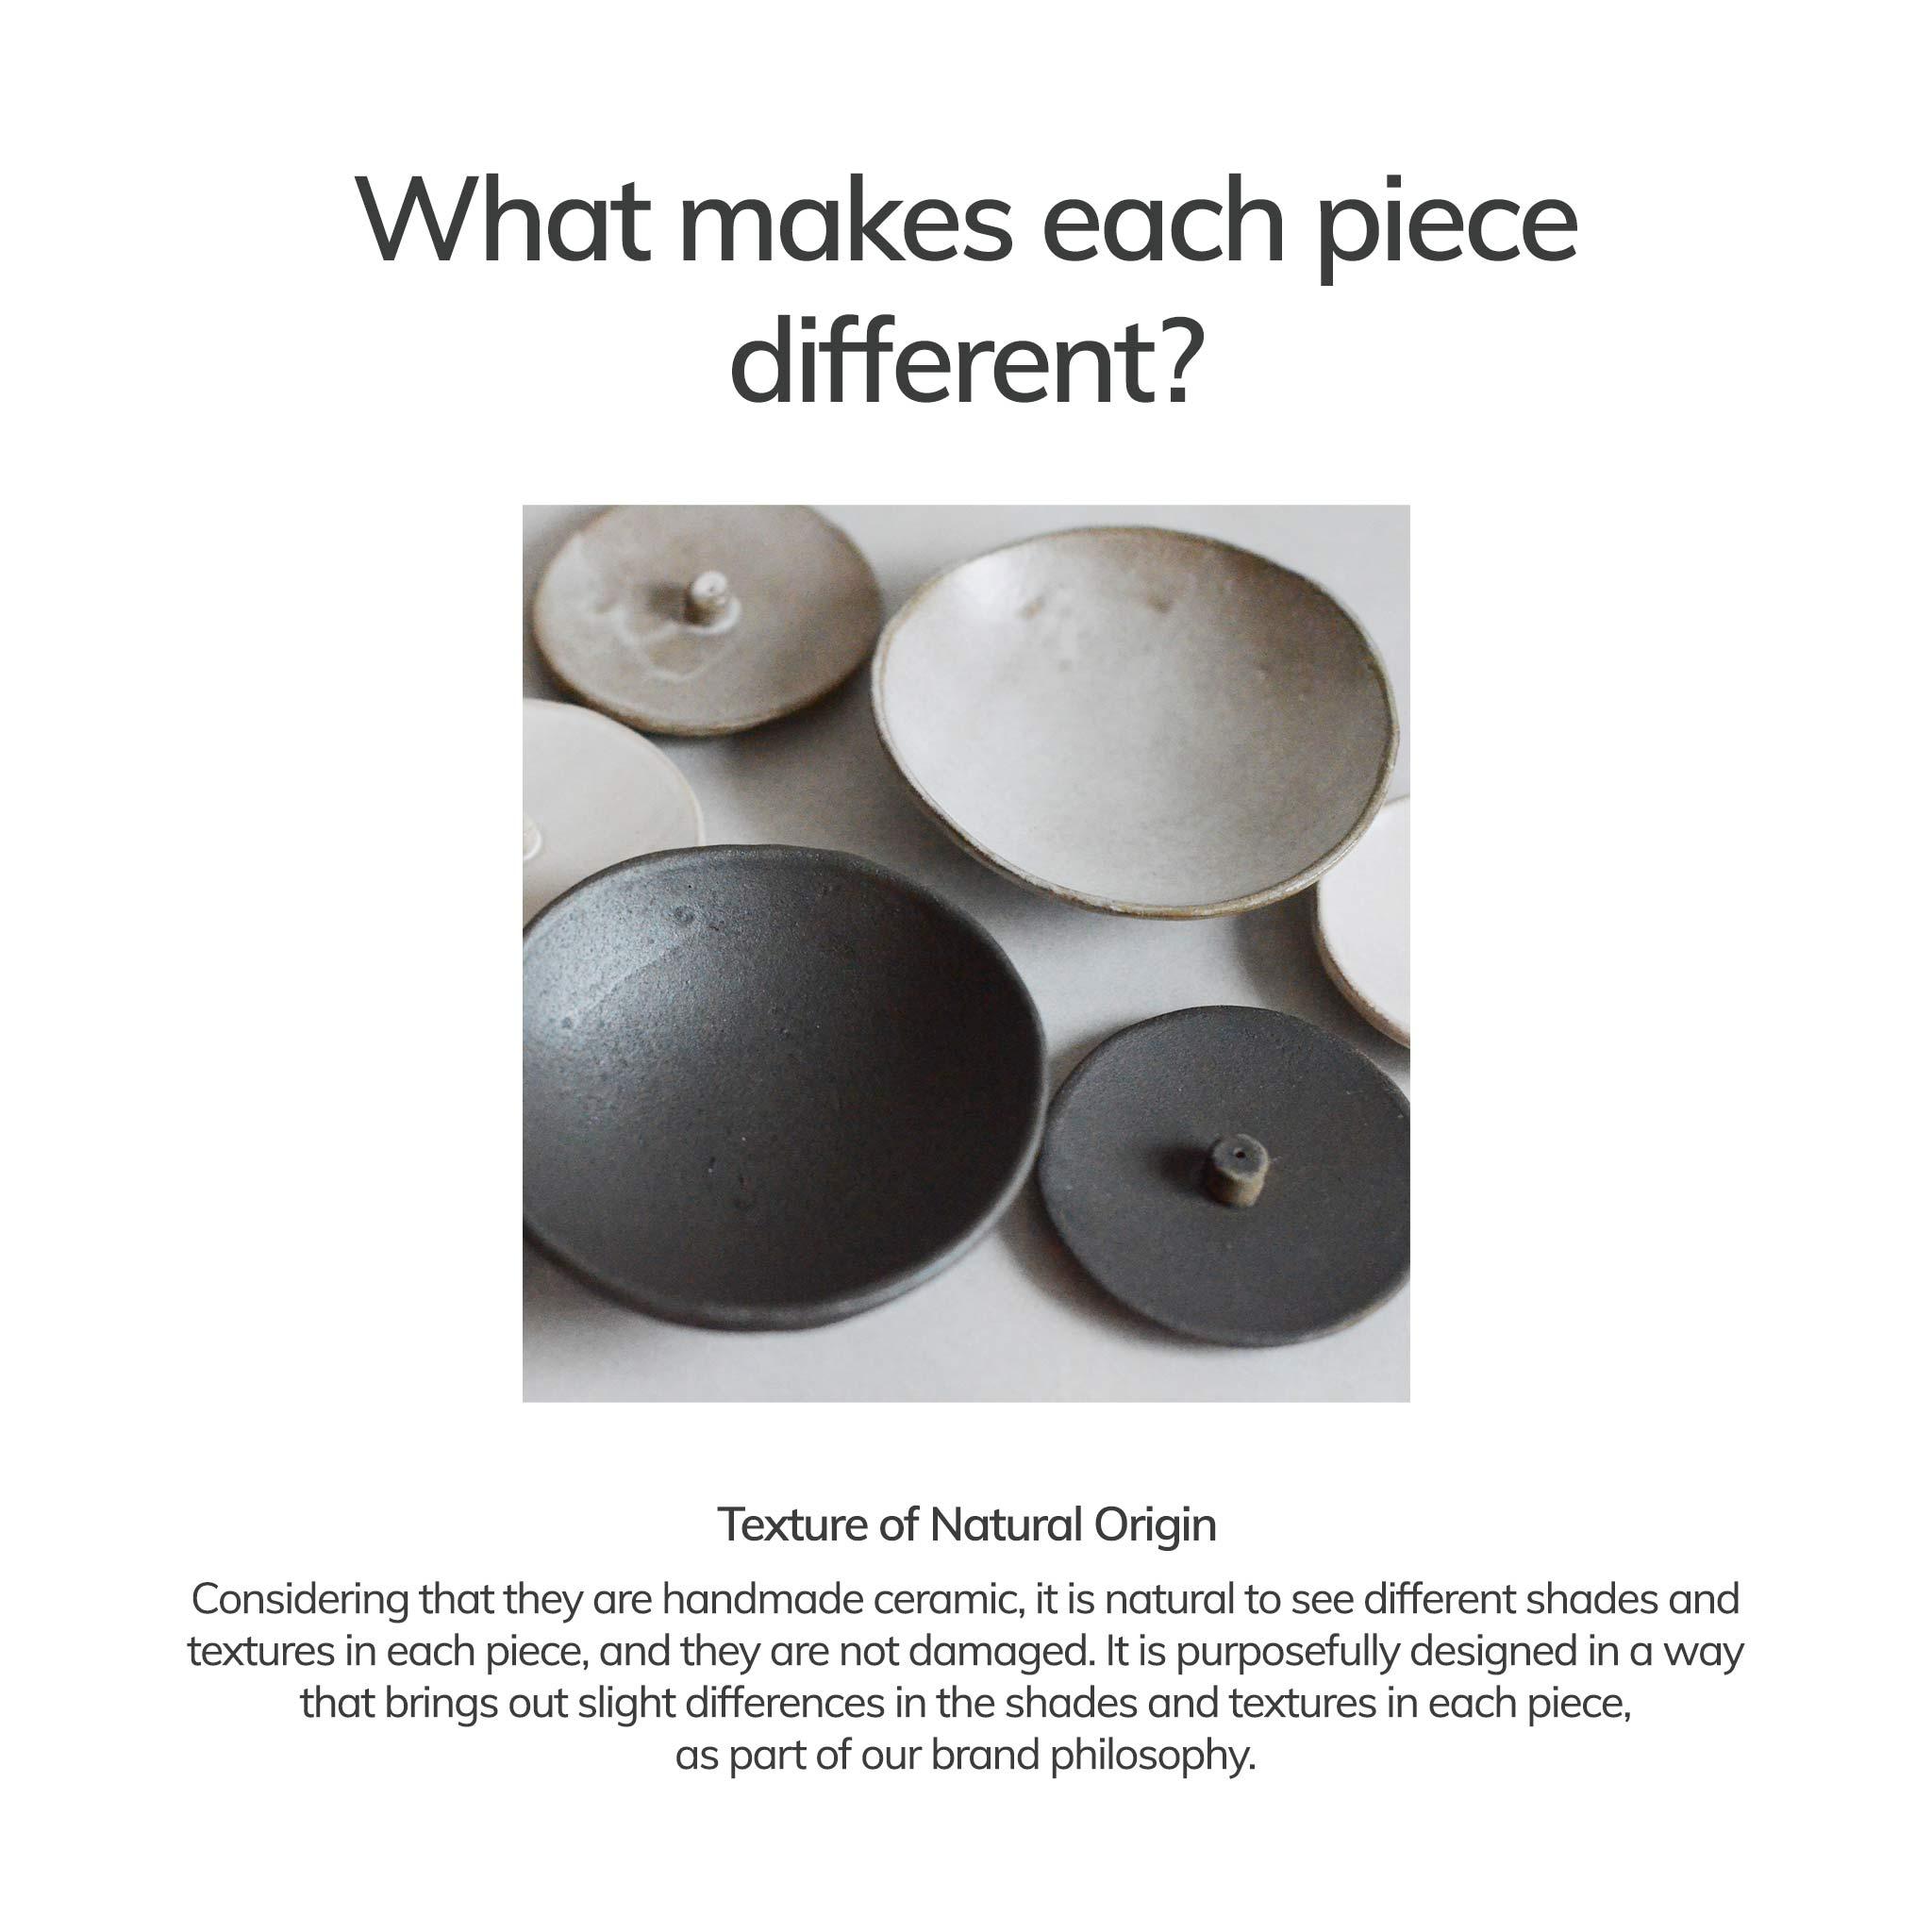 natural texture and colors of incense holders and bowls